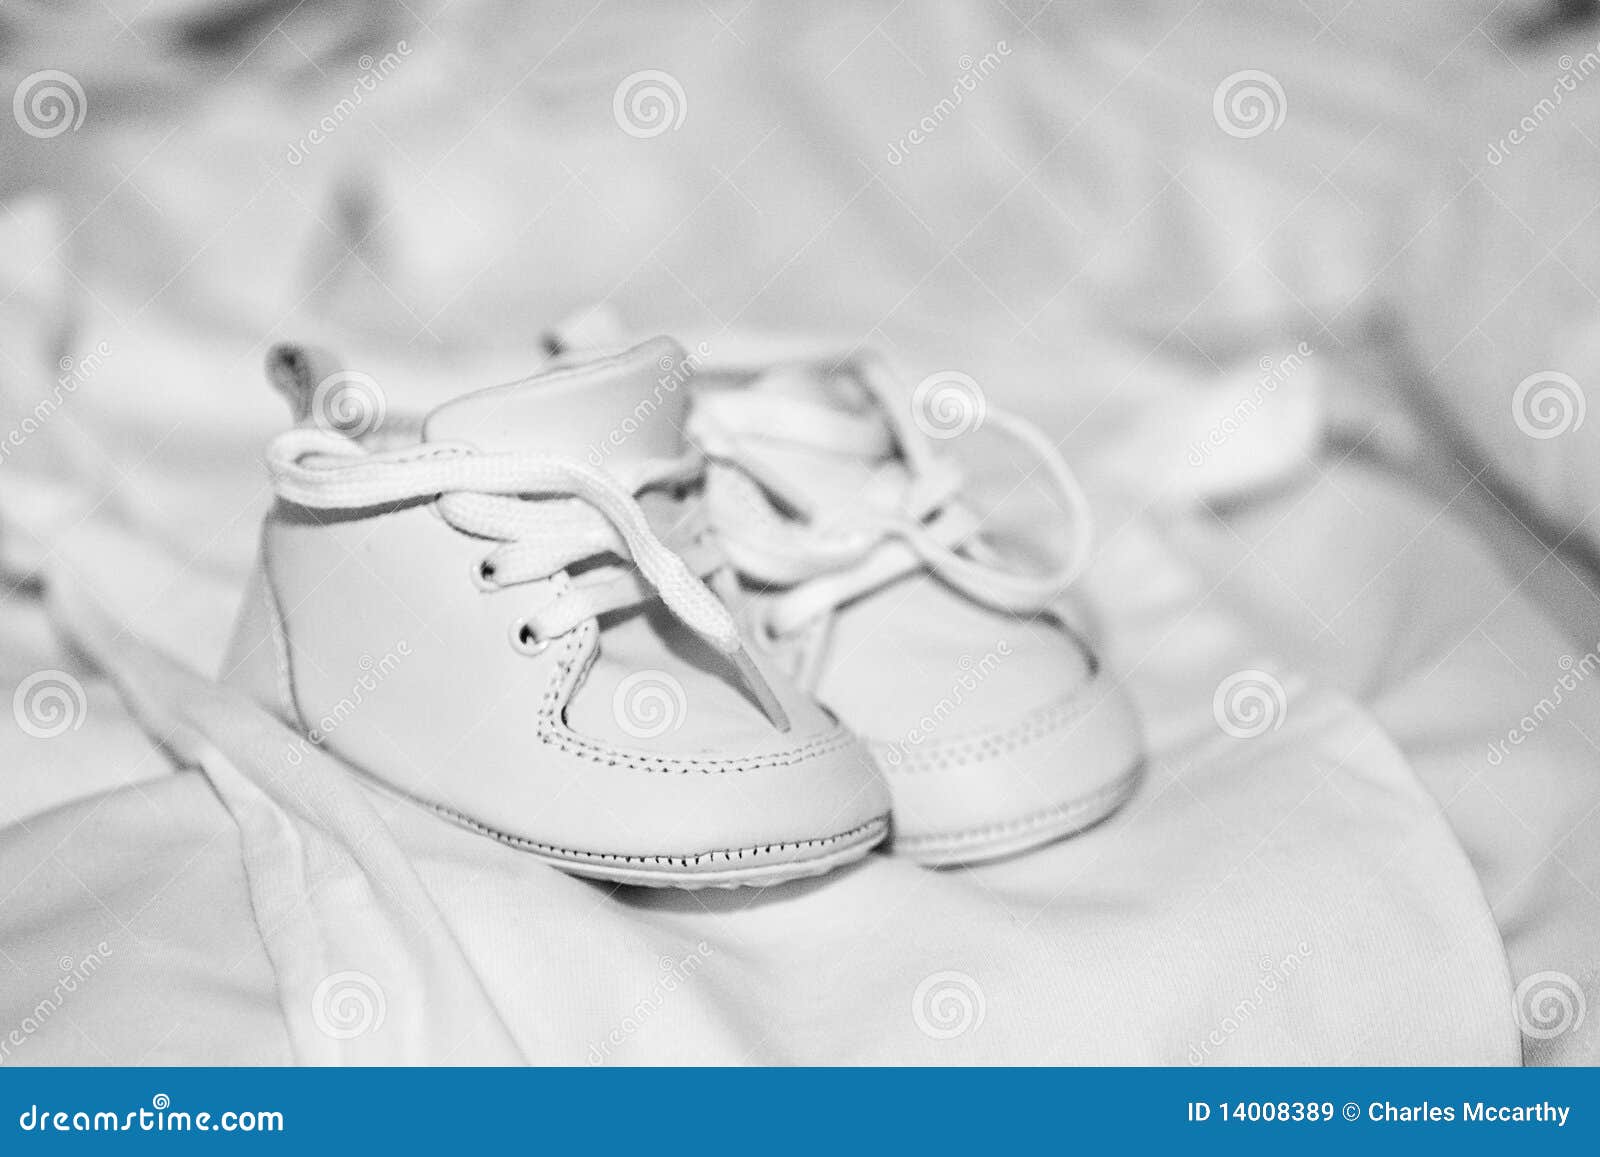 Pair Of White Baby Shoes Royalty Free Stock Images - Image: 14008389